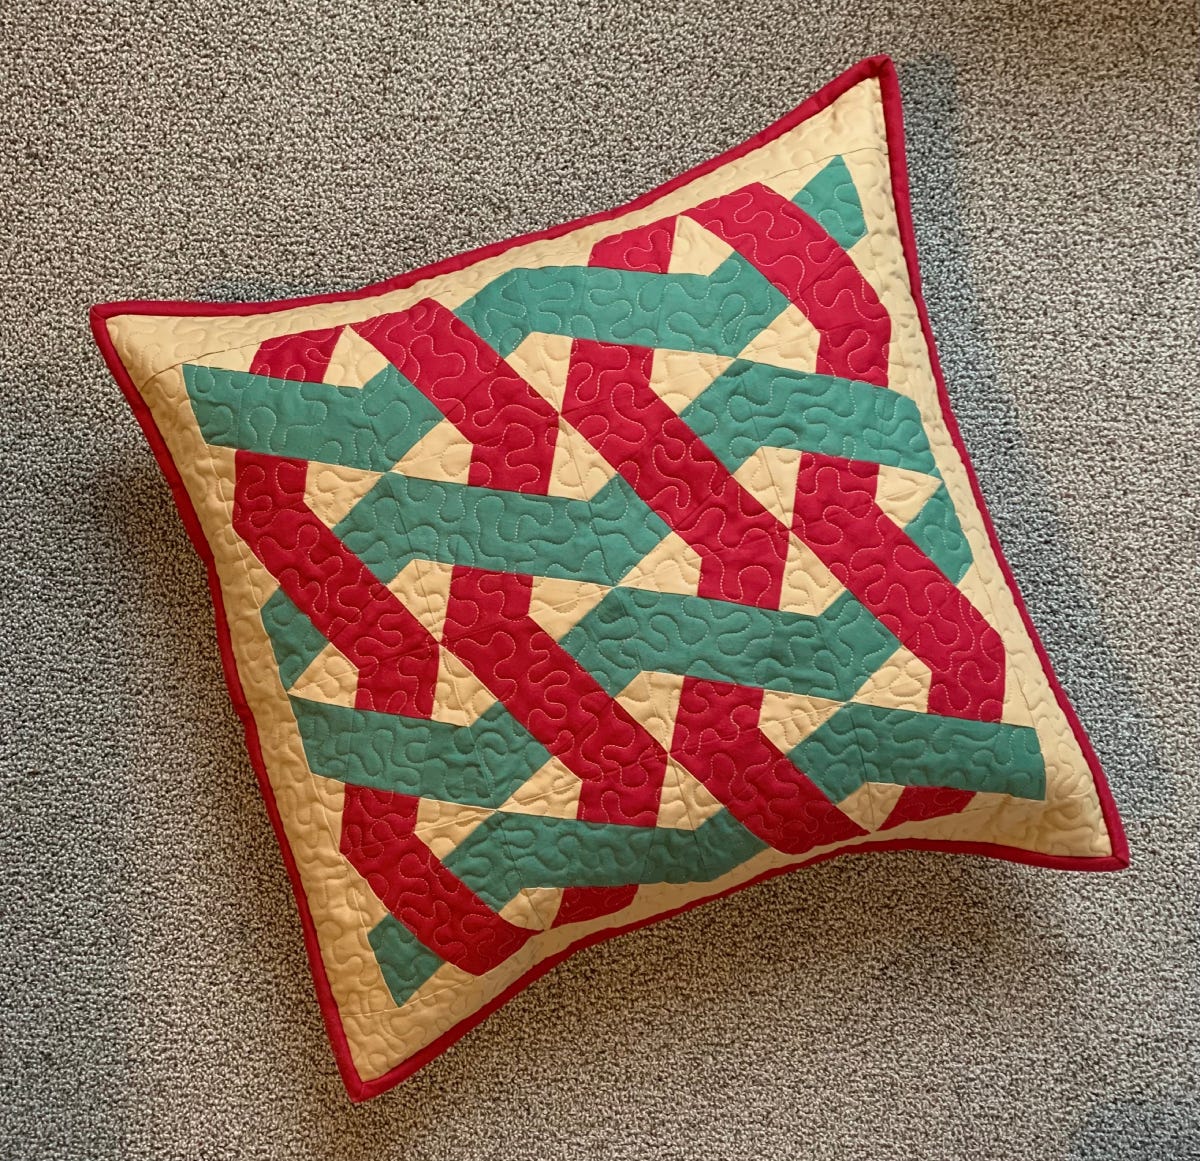 Finished Front of the Holiday Washington's Puzzle Pillow Cover